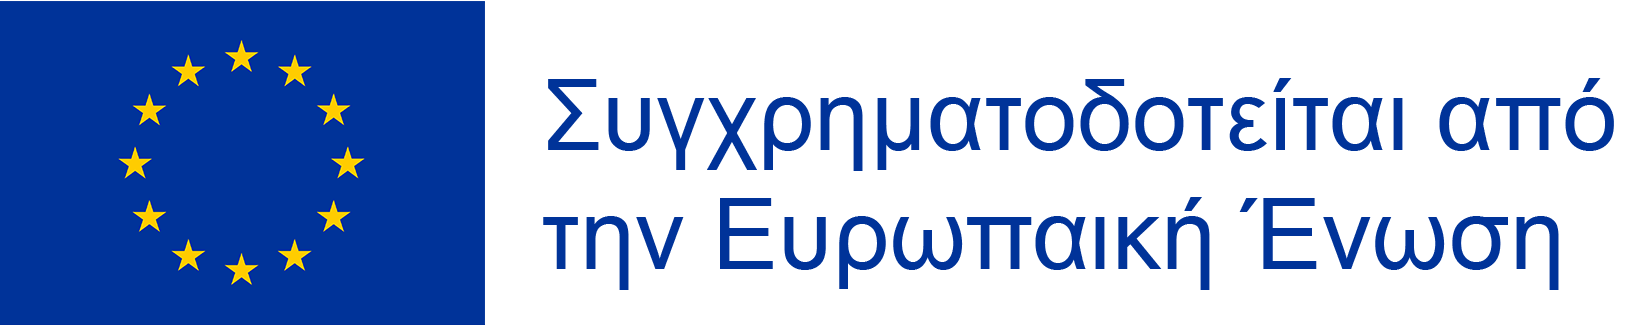 Co -funded by the Europian Union